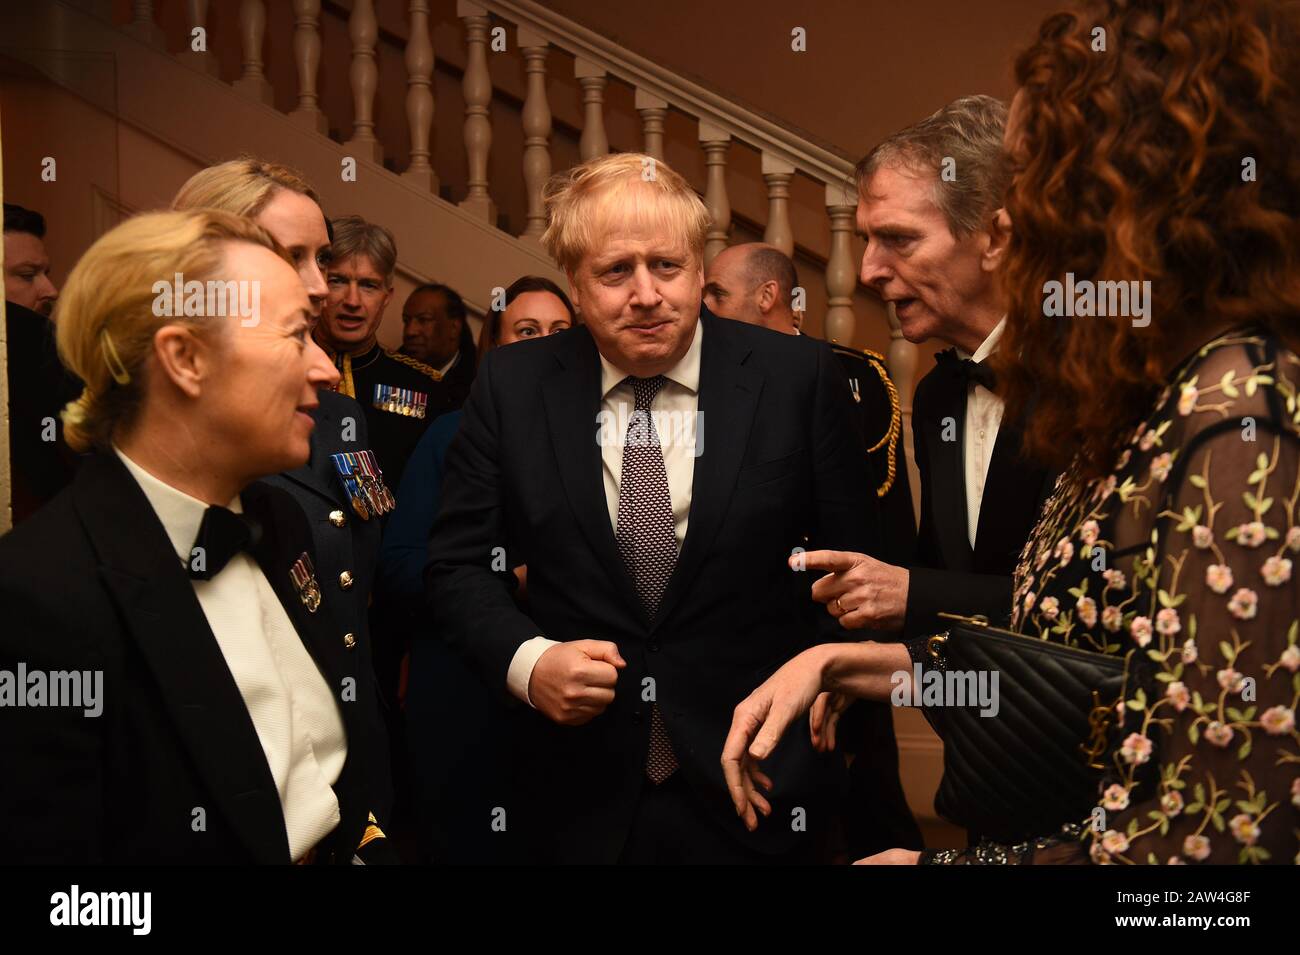 Rebekah Brooks (right) Chief Executive of News UK and Tony Gallagher Editor in Chief, The Sun (second right) with Prime Minister Boris Johnson as he arrives for The Sun Military Awards 2020 held at the Banqueting House, London. PA Photo. Picture date: Thursday February 6, 2020. Photo credit should read: Kirsty O'Connor/PA Wire Stock Photo